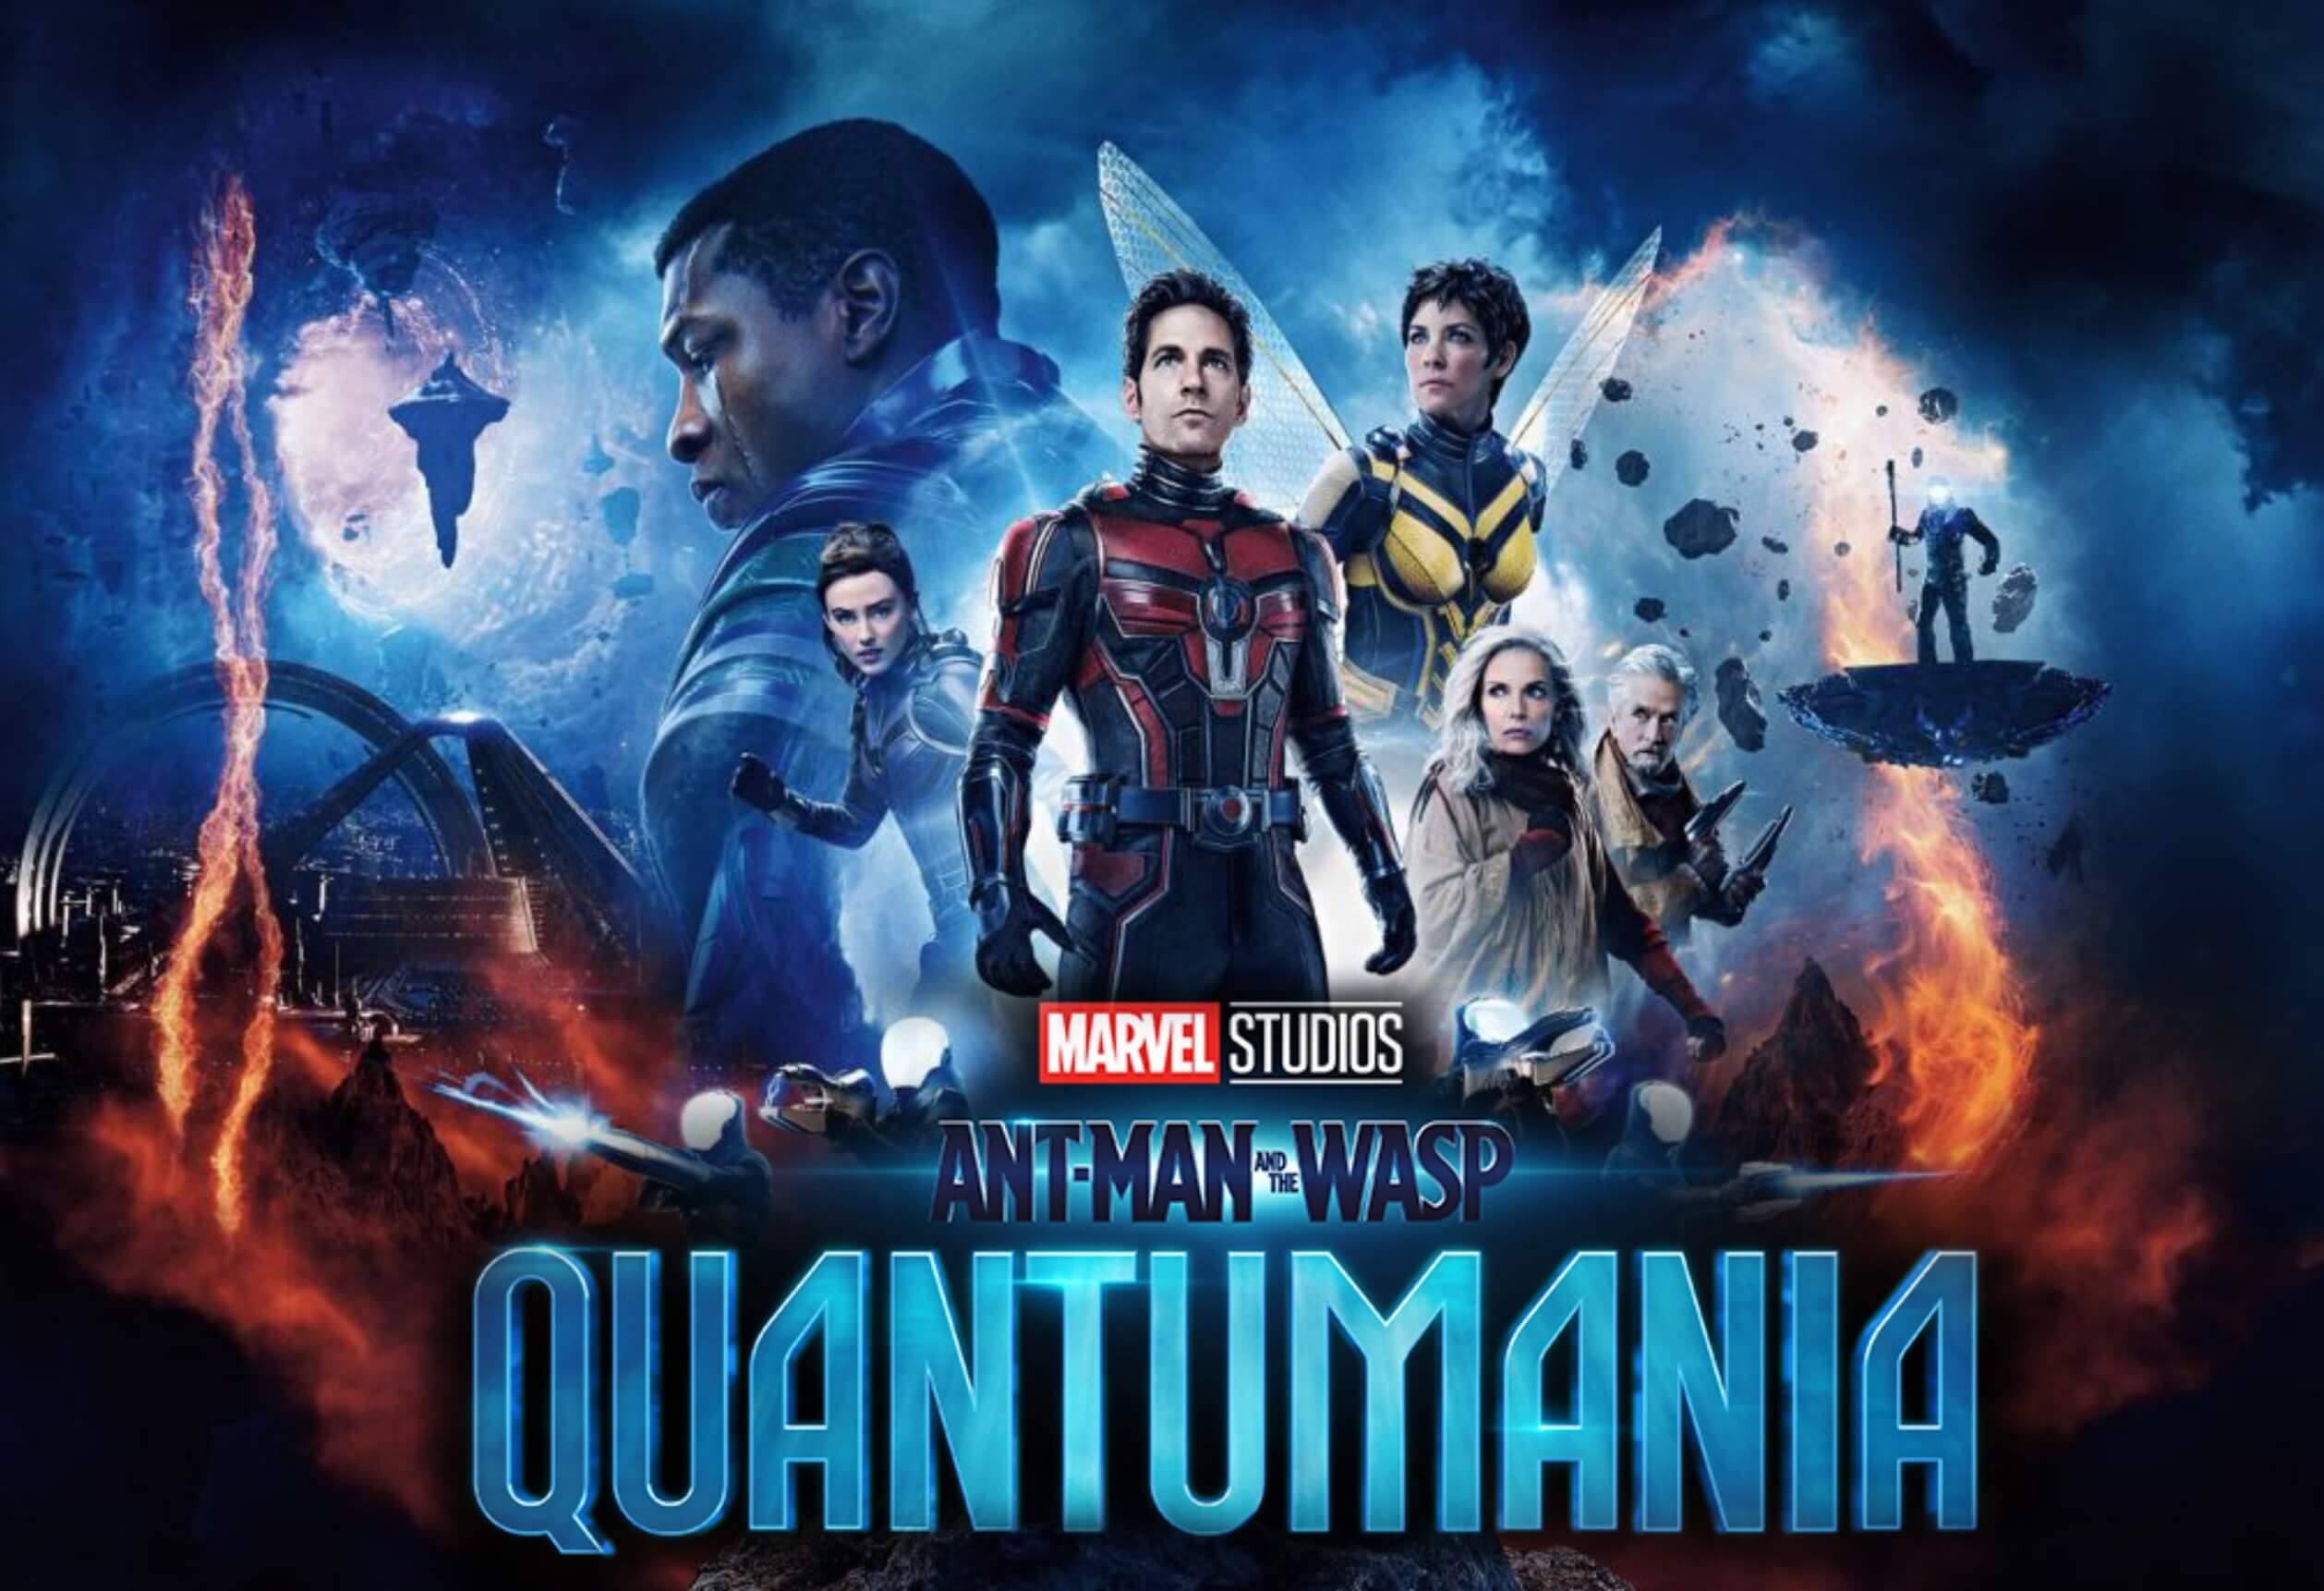 Meet the Amazing Cast of Ant-Man and the Wasp: Quantumania